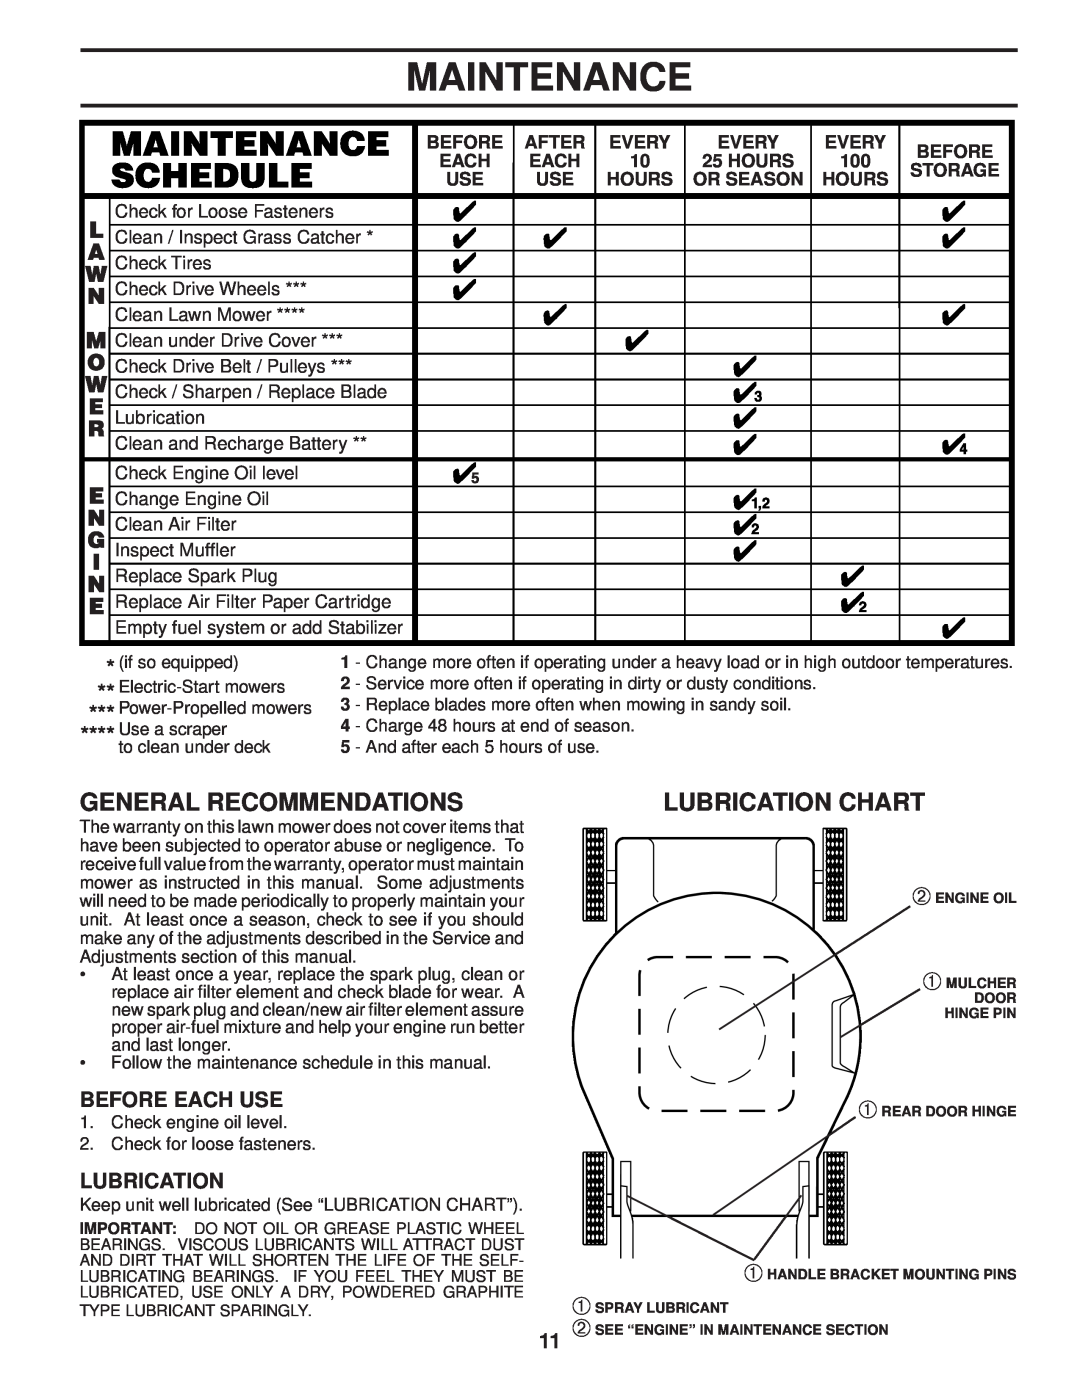 Husqvarna 87521HVE owner manual Maintenance, General Recommendations, Lubrication Chart, Before Each Use 